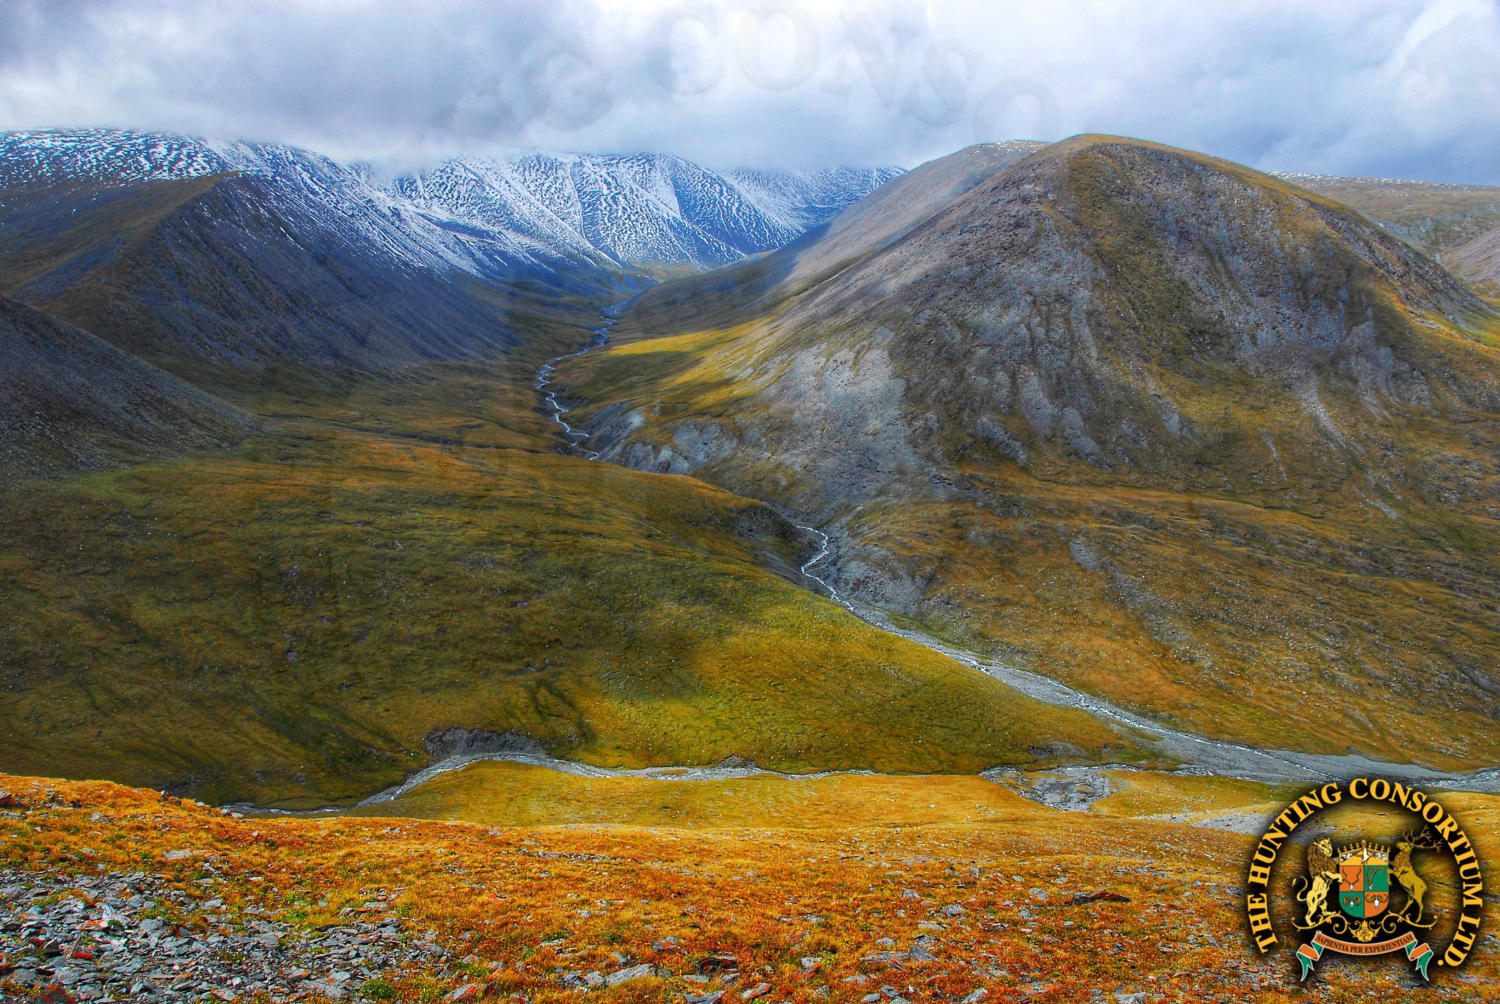 The mountains of Mongolia are truly captivating. It seems more like a depiction of middle earth of Lord of the Rings than the Altai sheep country.